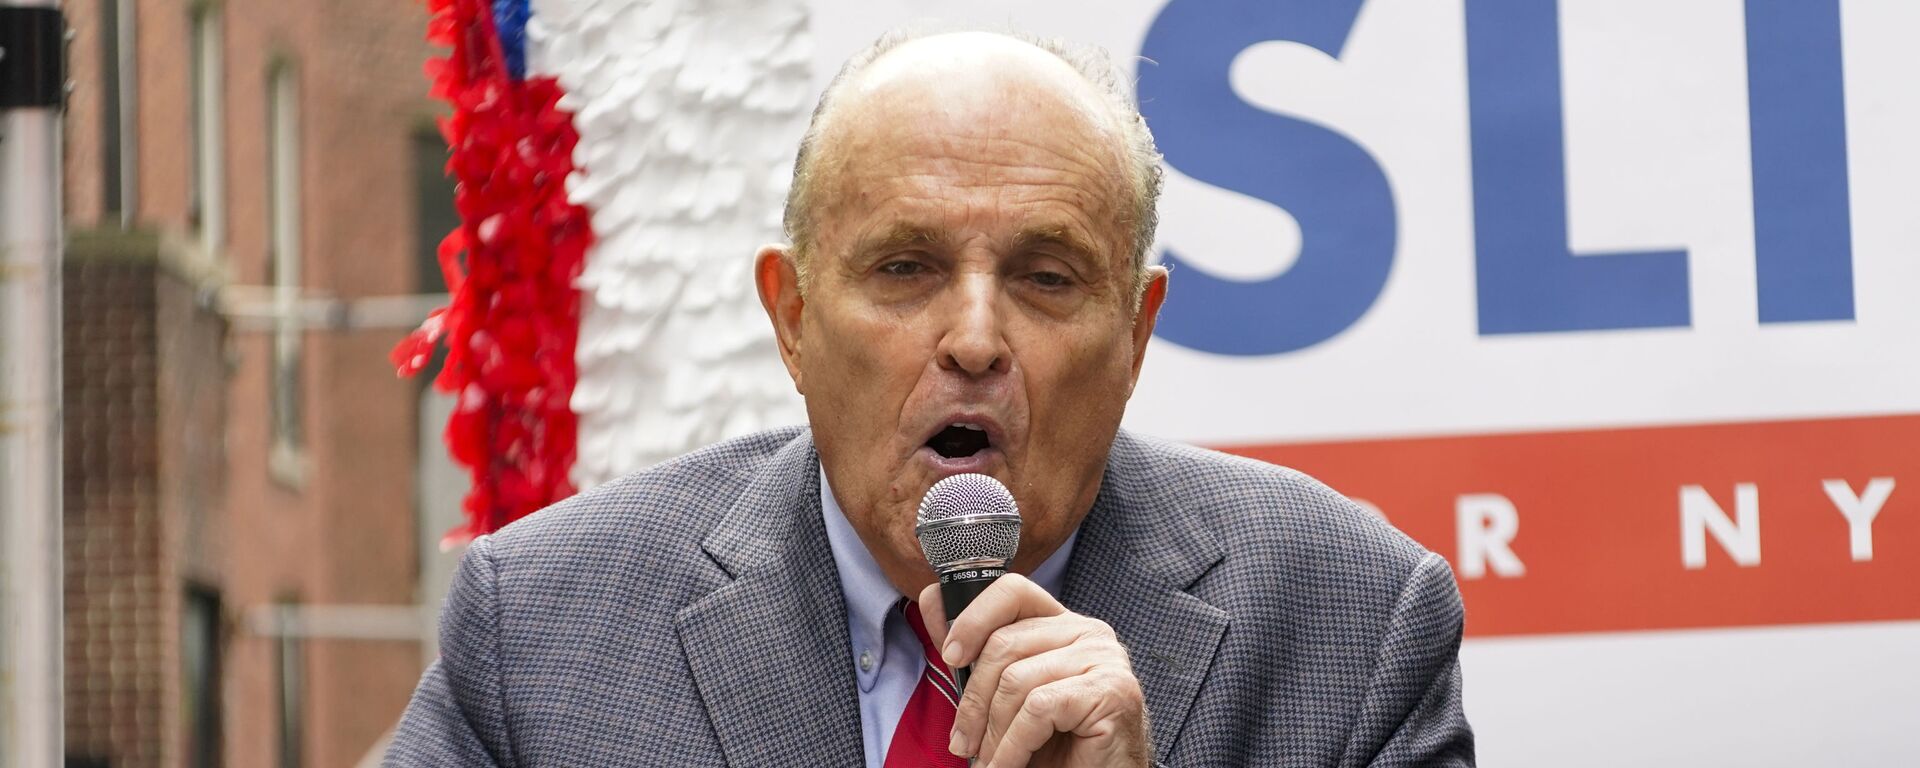 Former New York City Mayor Rudy Giuliani speaks during a campaign event for Republican mayoral candidate Curtis Sliwa, Monday, June 21, 2021, in New York. Giuliani endorsed Sliwa in his bid for mayor. - Sputnik International, 1920, 23.05.2022